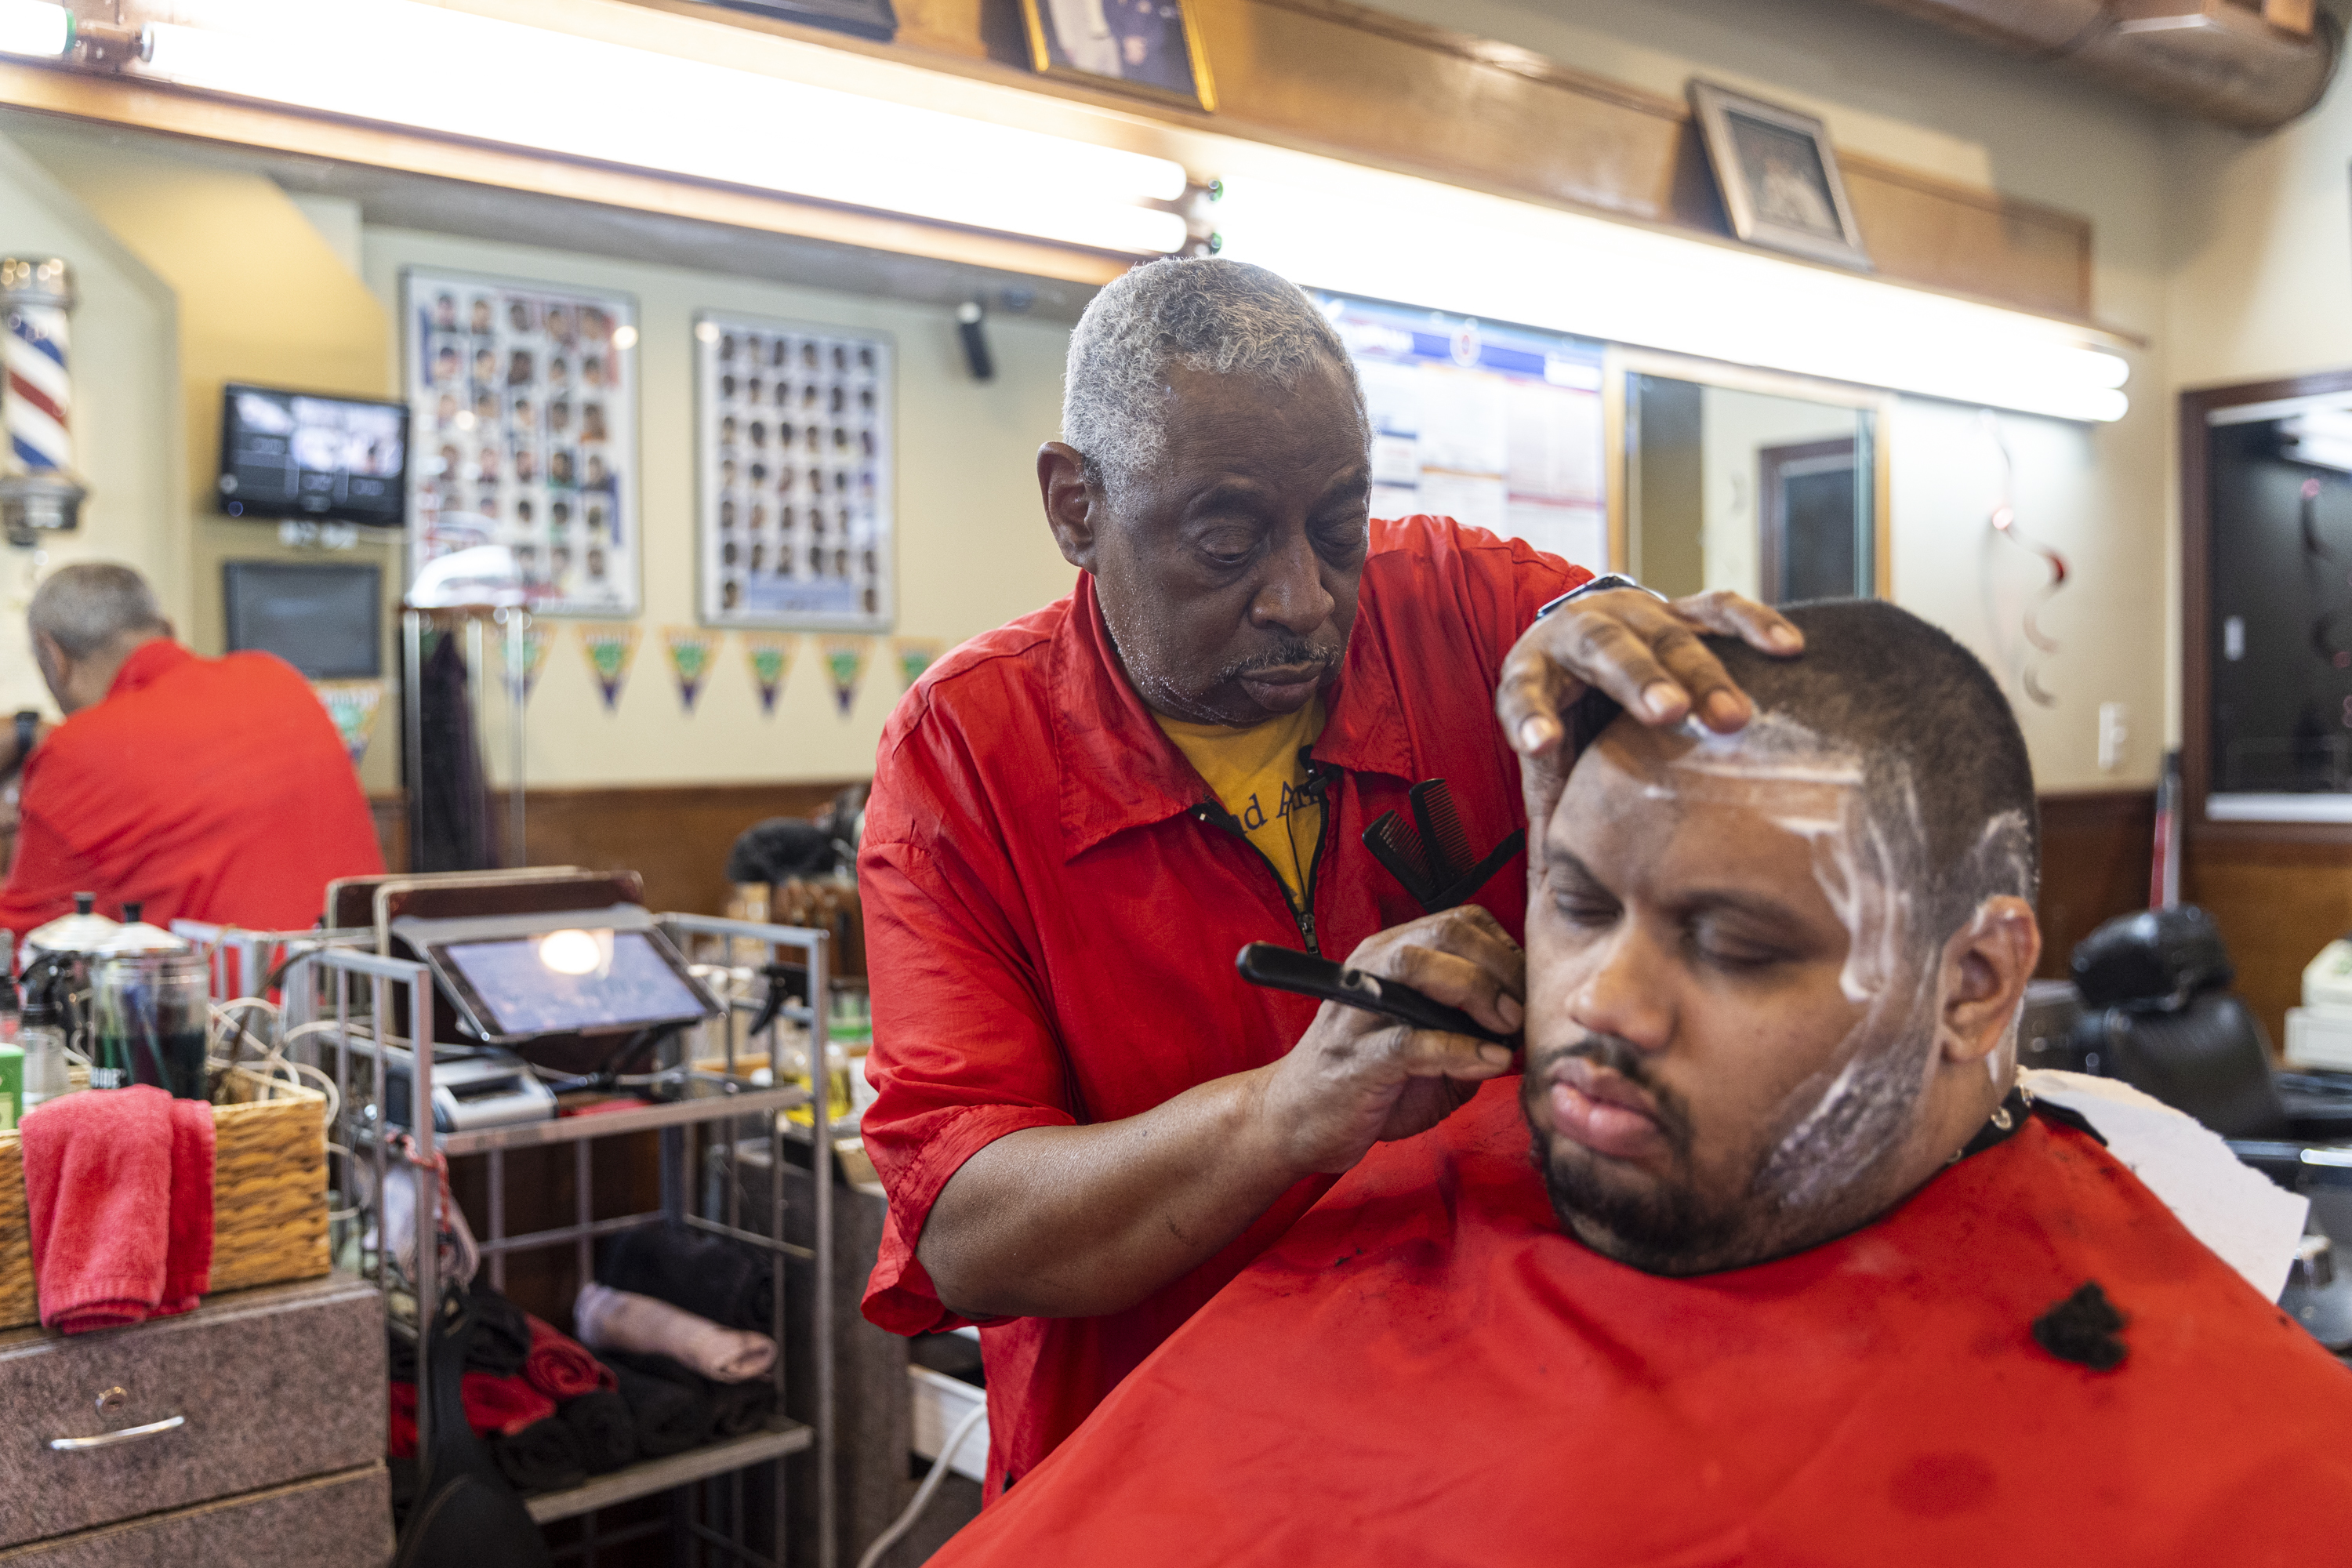 West Philadelphia's Rice's Barbershop gives last cut after 70 years